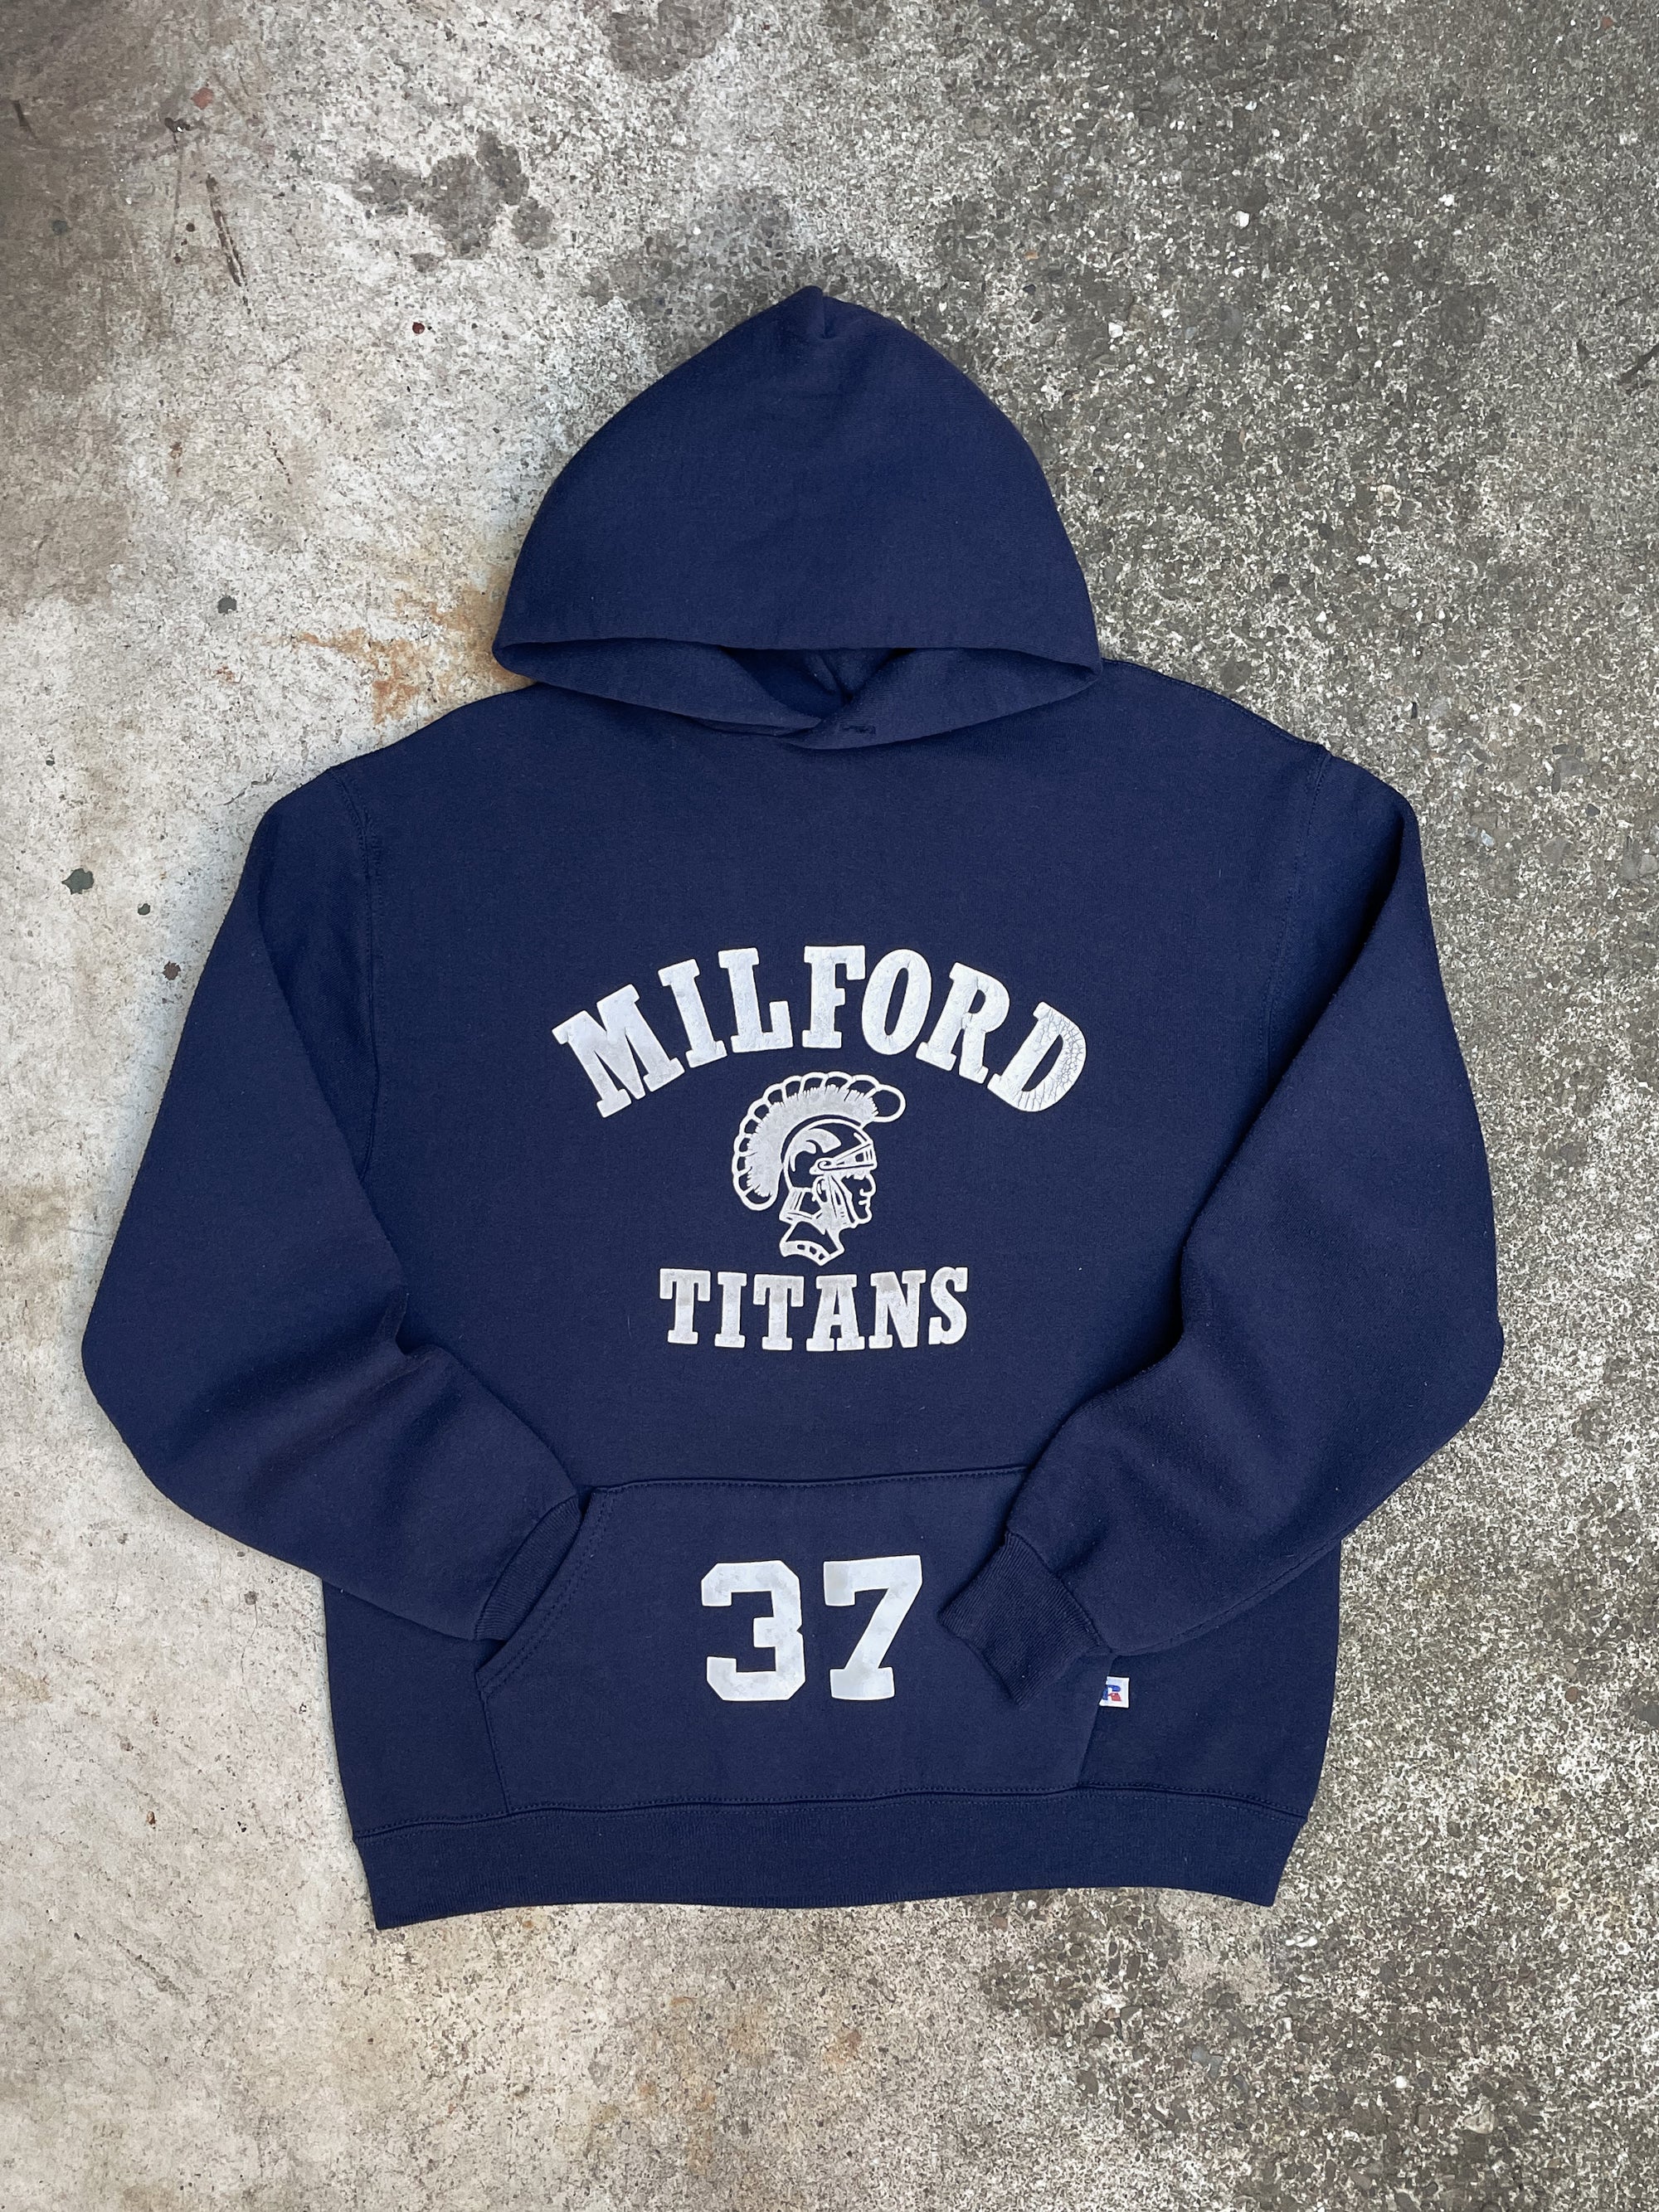 1980s Russell “Milford Titans” Hoodie (M/L)